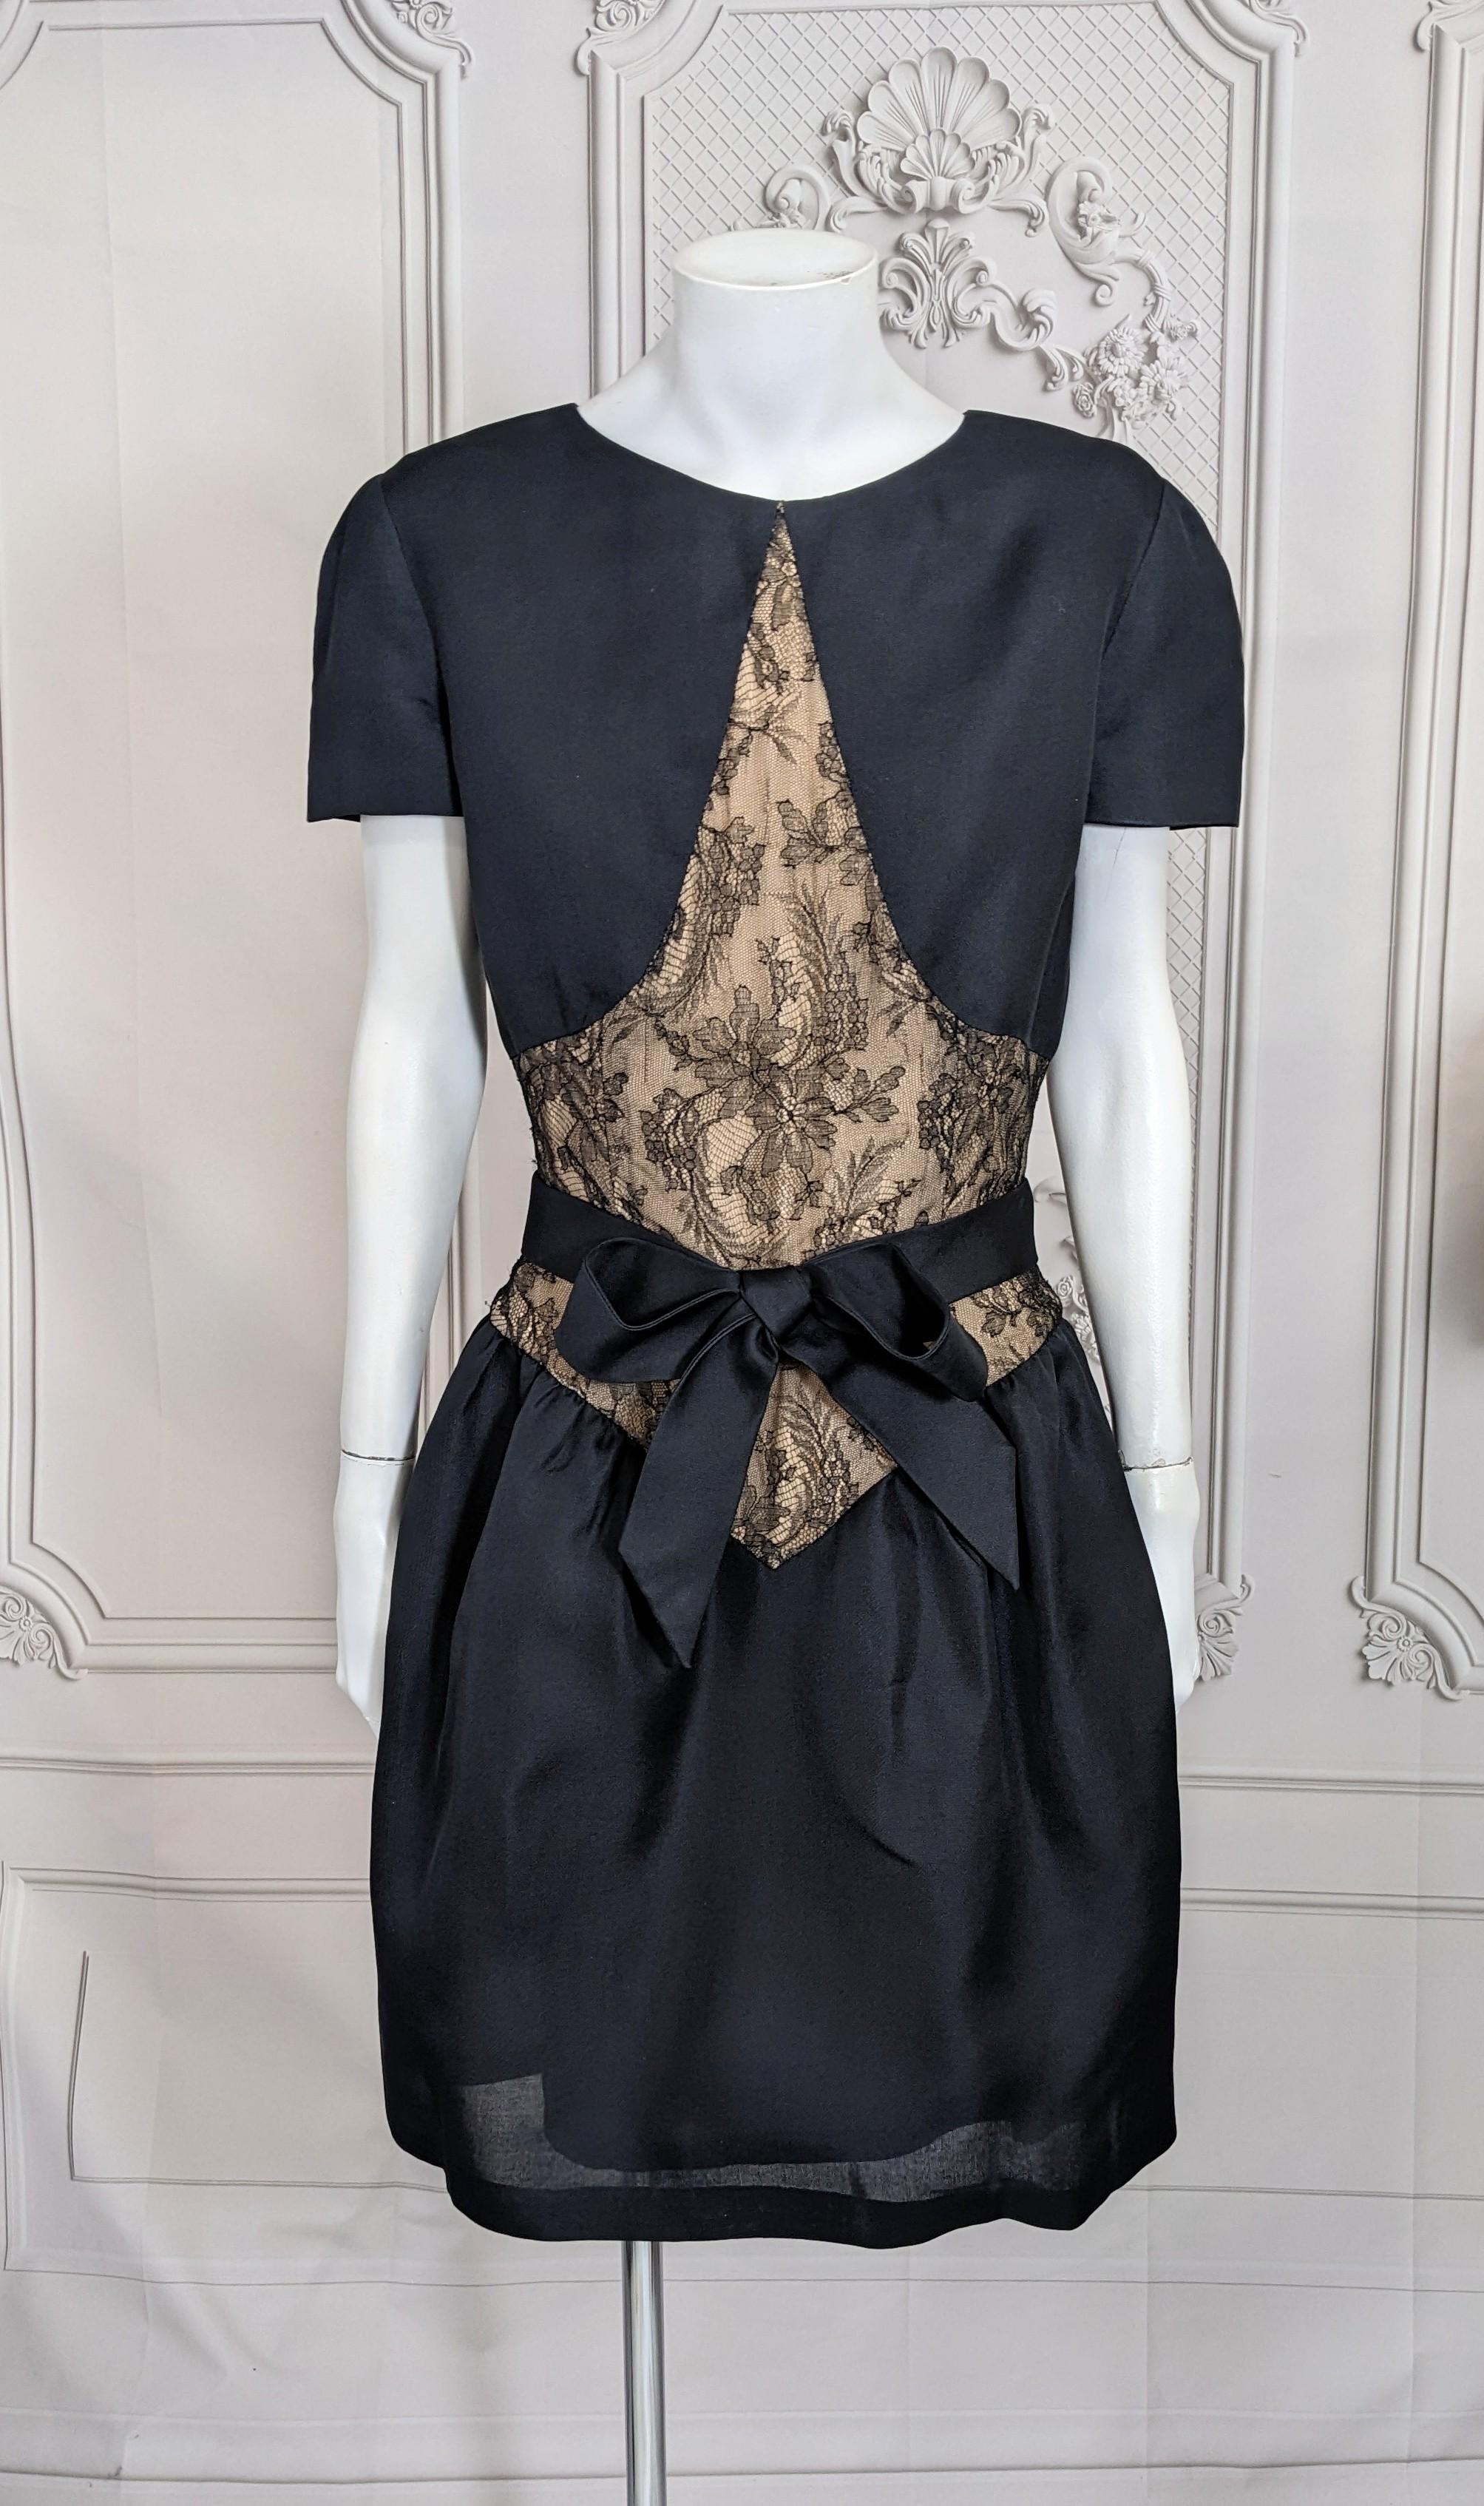 Elegant Bill Blass Organza and Lace Cocktail Dress. Black silk organza with lace inserts with self  belt. Faux bolero design with puffed short skirt. Back zip entry with gazar attached bow belt.
2000's USA. Small size 2-4.